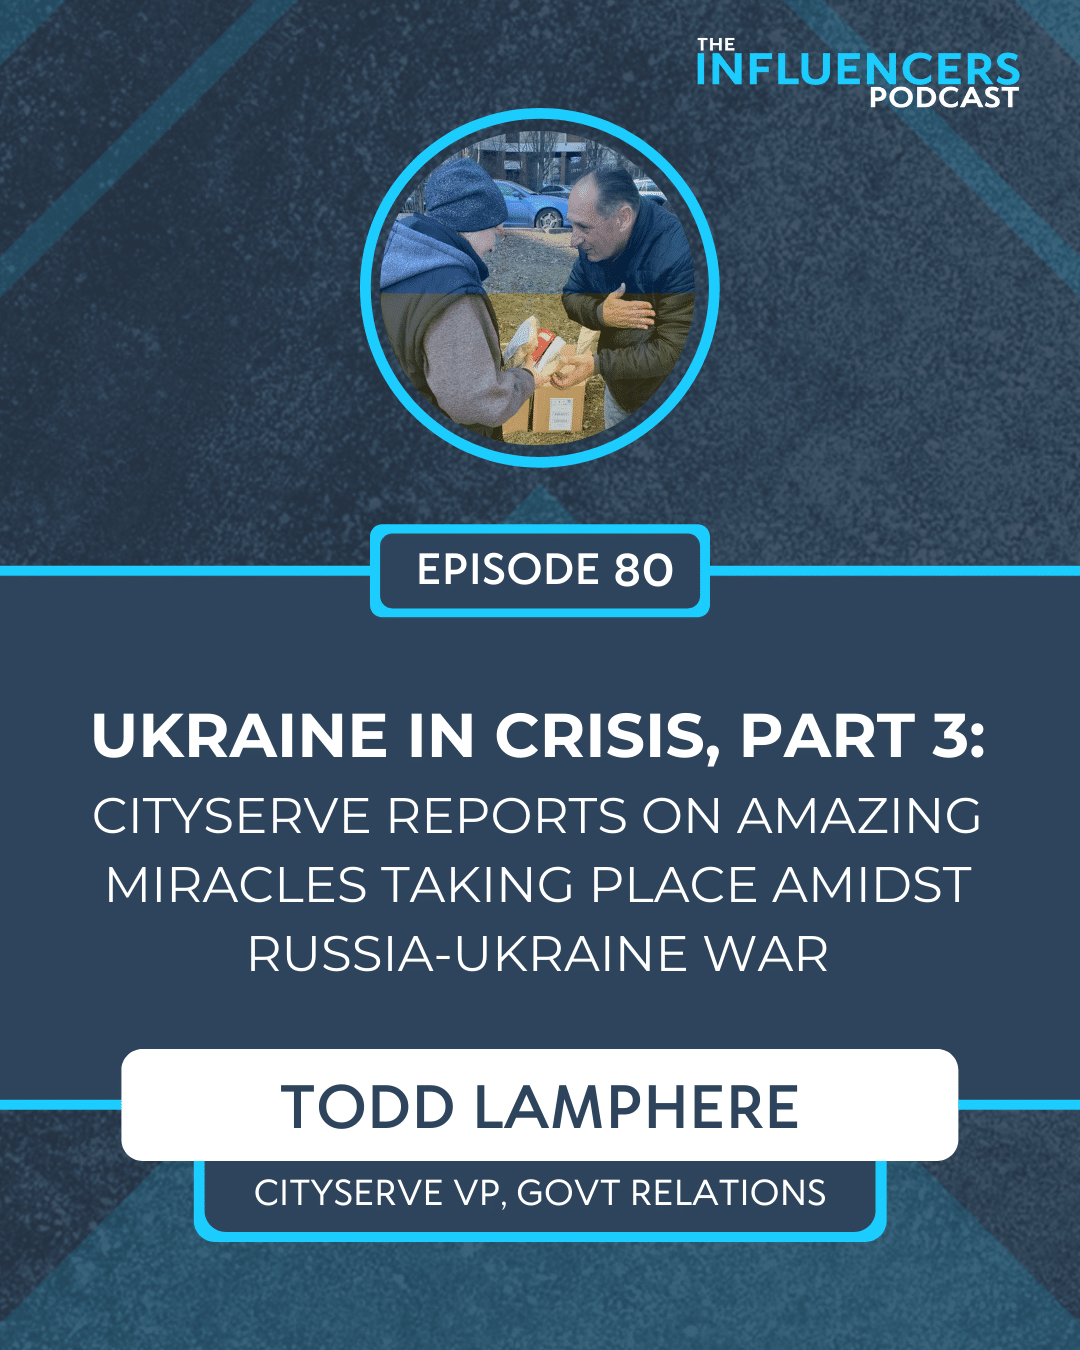 Episode 80 with Todd Lamphere, CityServe VP, Government Relations.